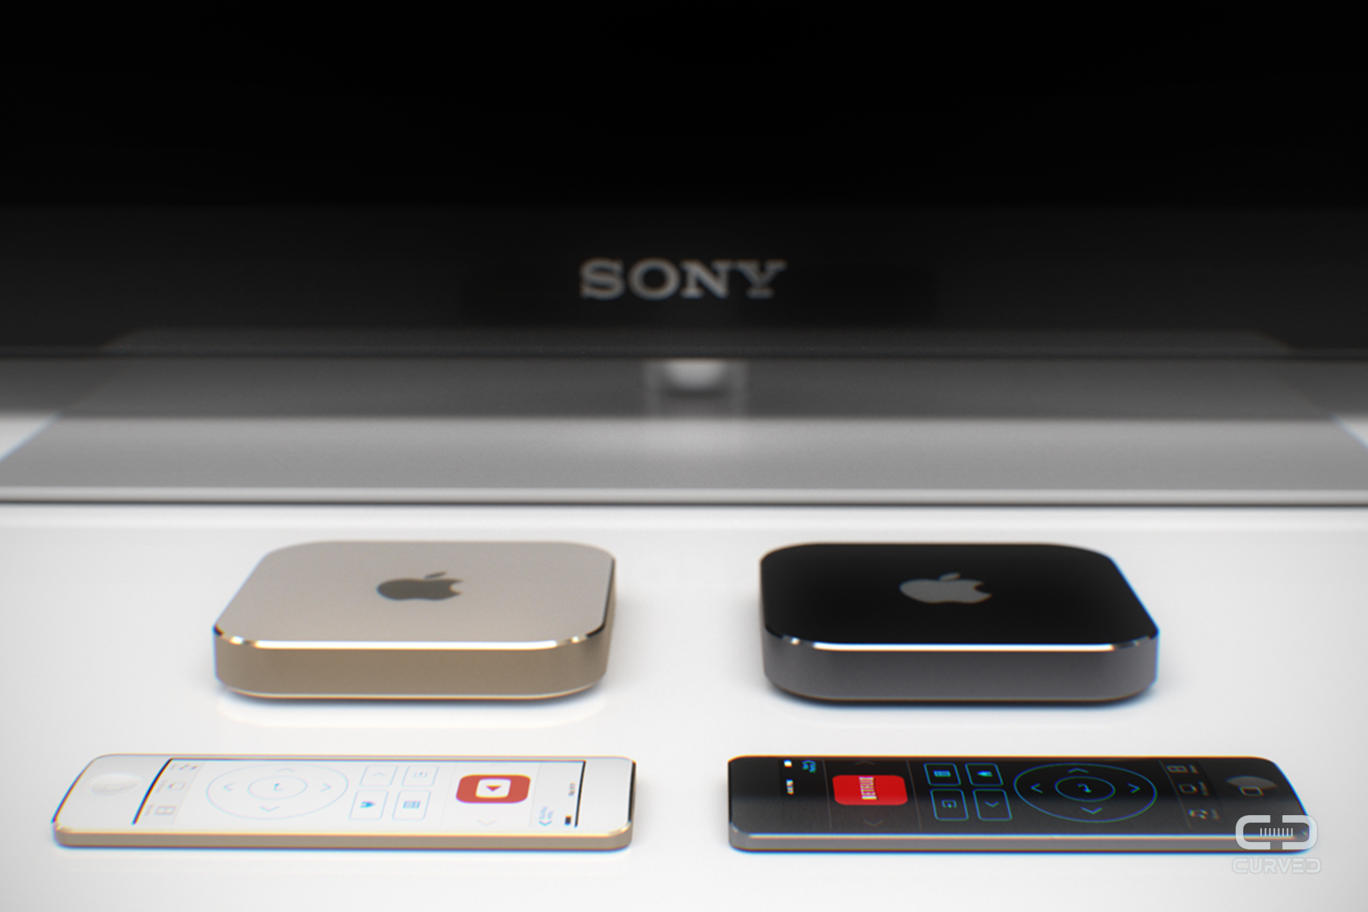 Apple pulls planned Apple TV hardware revamp announcement from WWDC